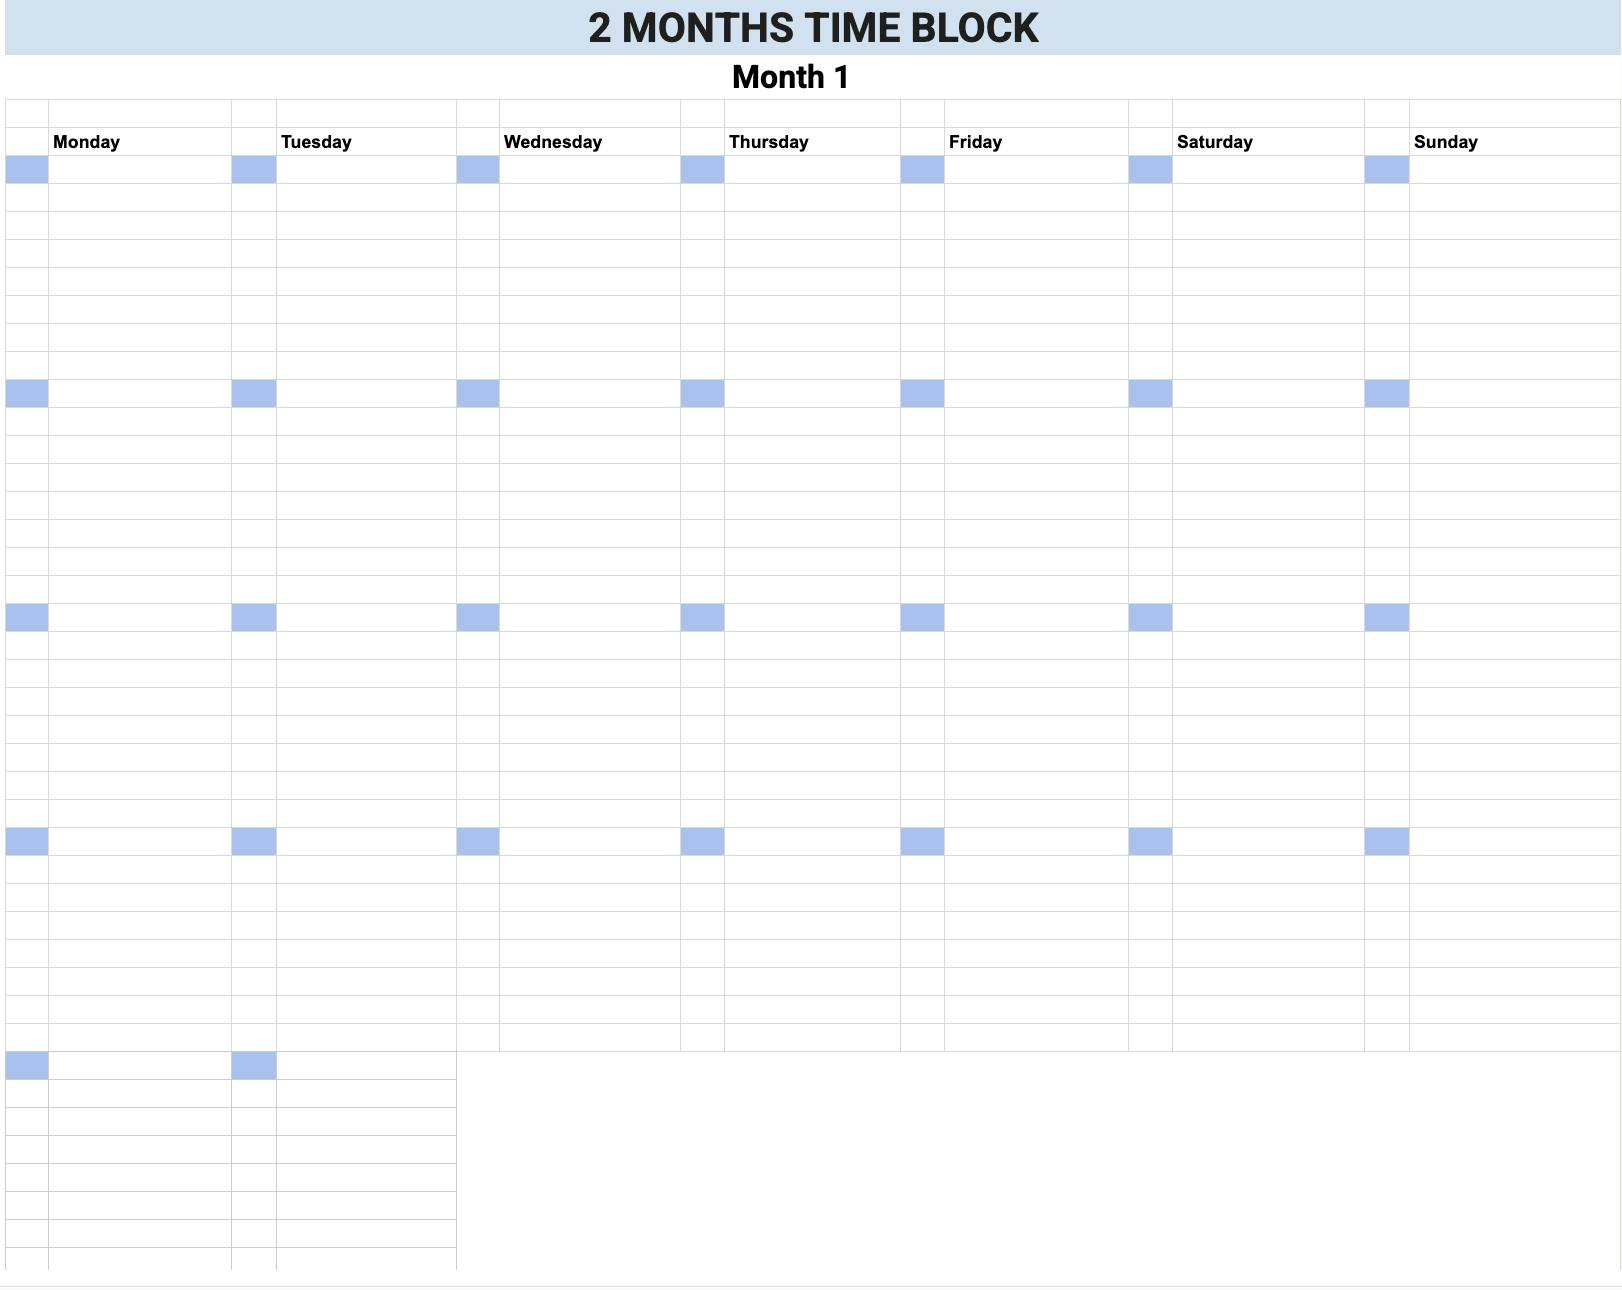 Two month time block template